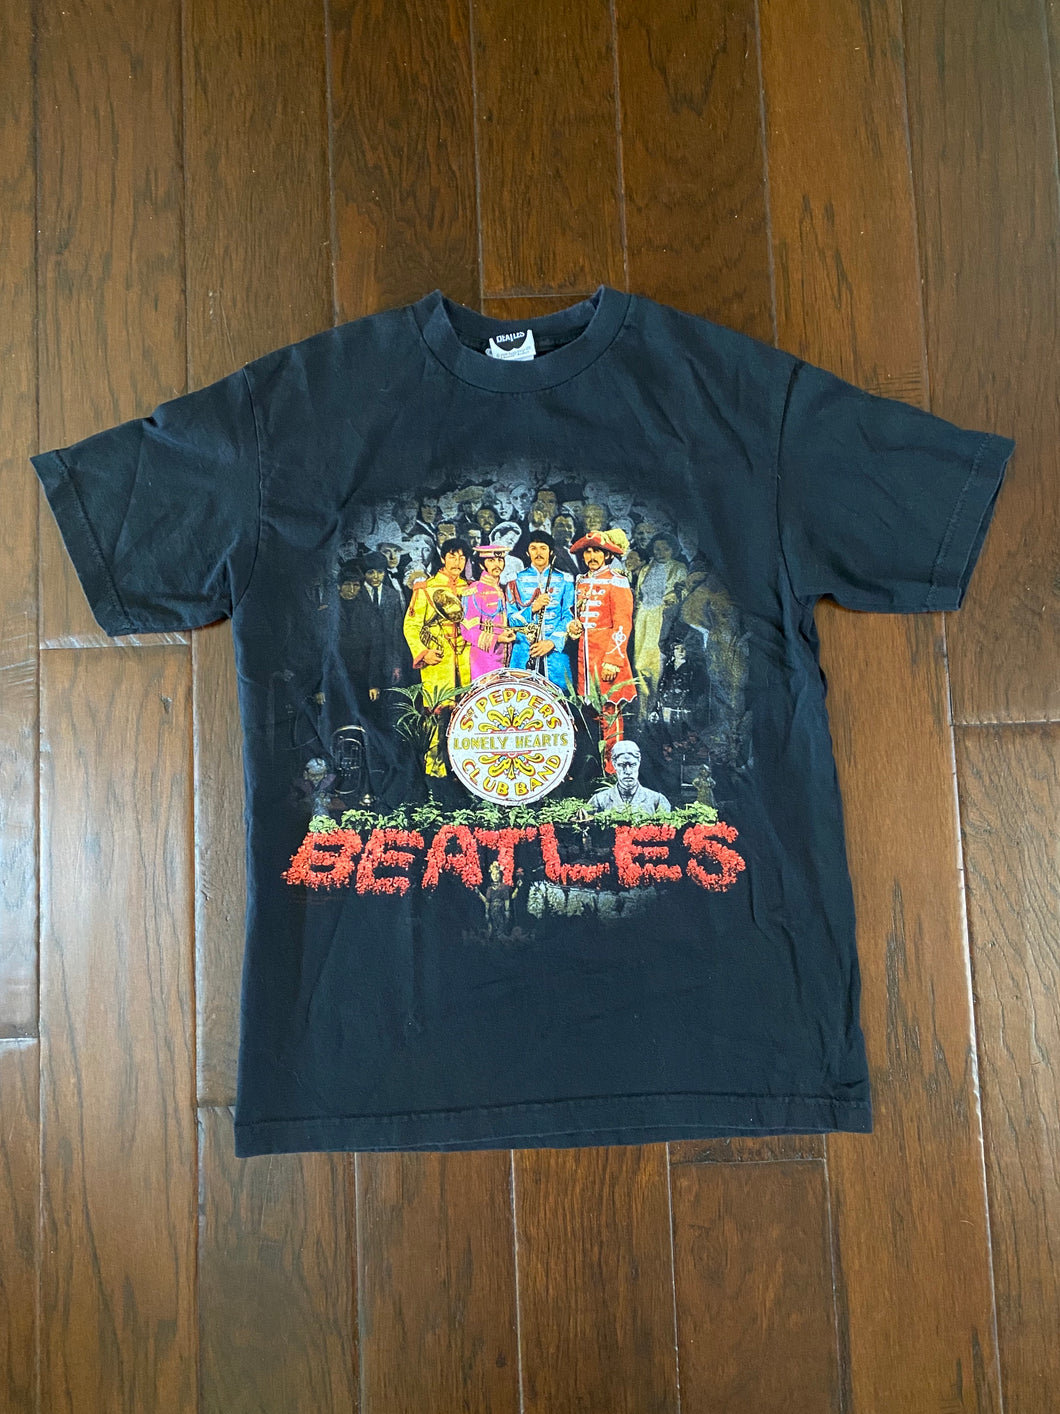 The Beatles 2005 “Sgt. Peppers Lonely Hearts Band” Vintage Distressed T-shirt